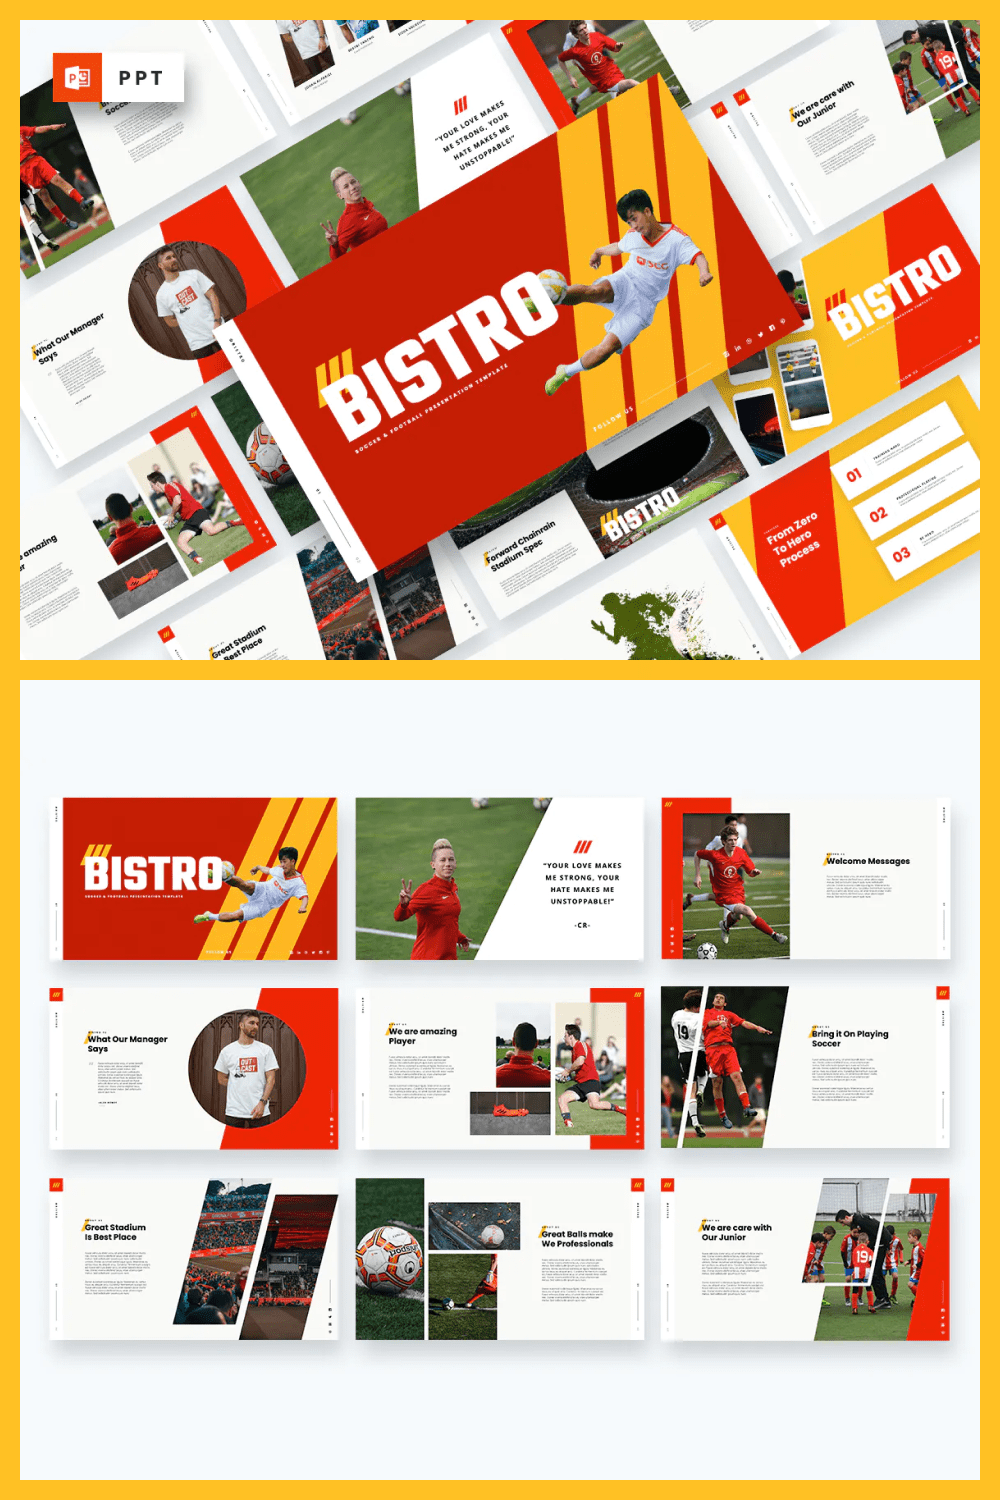 Bistro - soccer & football powerpoint template.